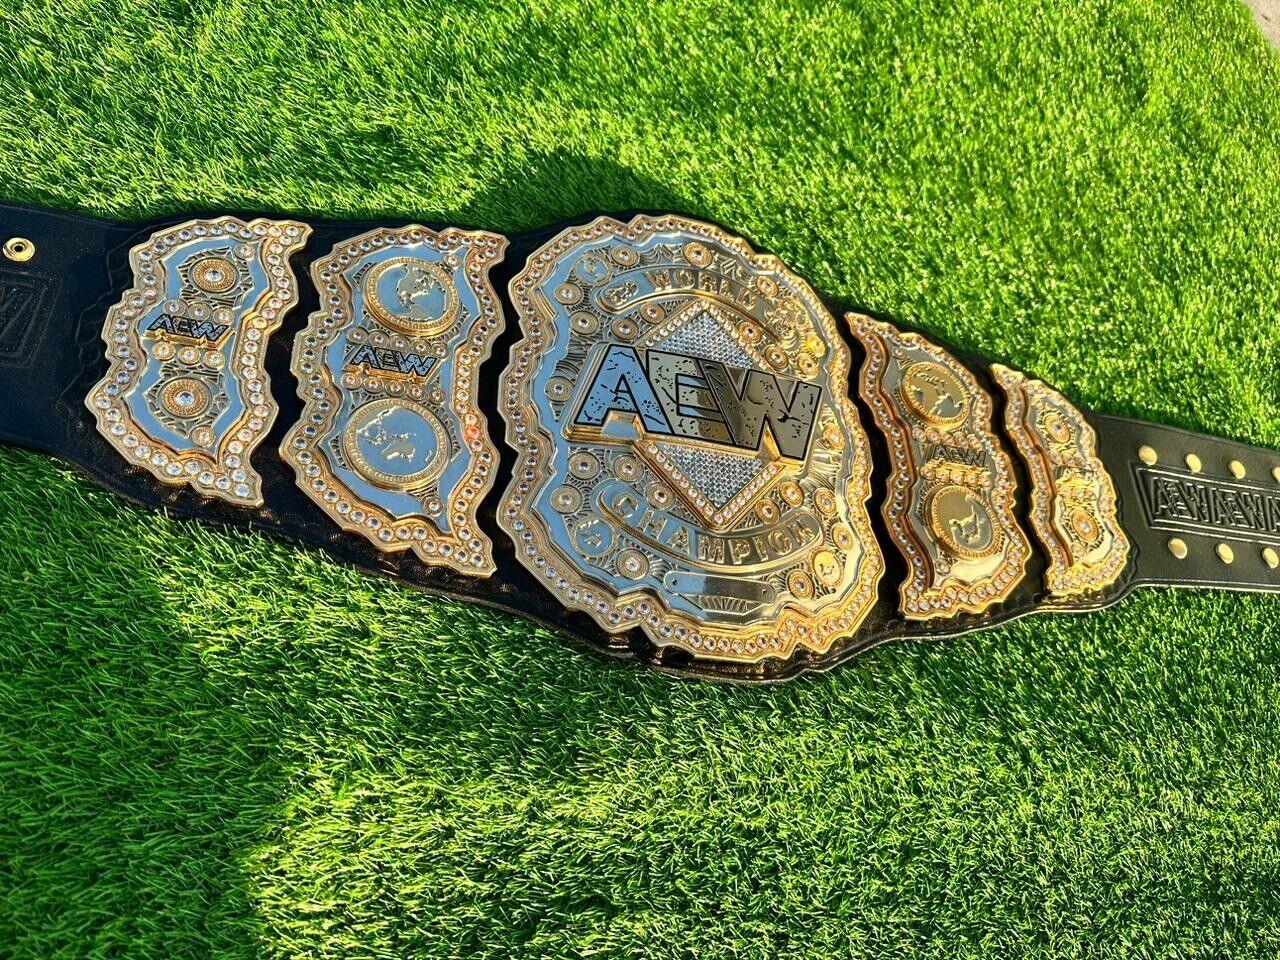 AEW WORLD HEAVYWEIGHT CHAMPIONSHIP 24K GOLD BELT FOUR LAYERS STACKED 4MM  PLATES